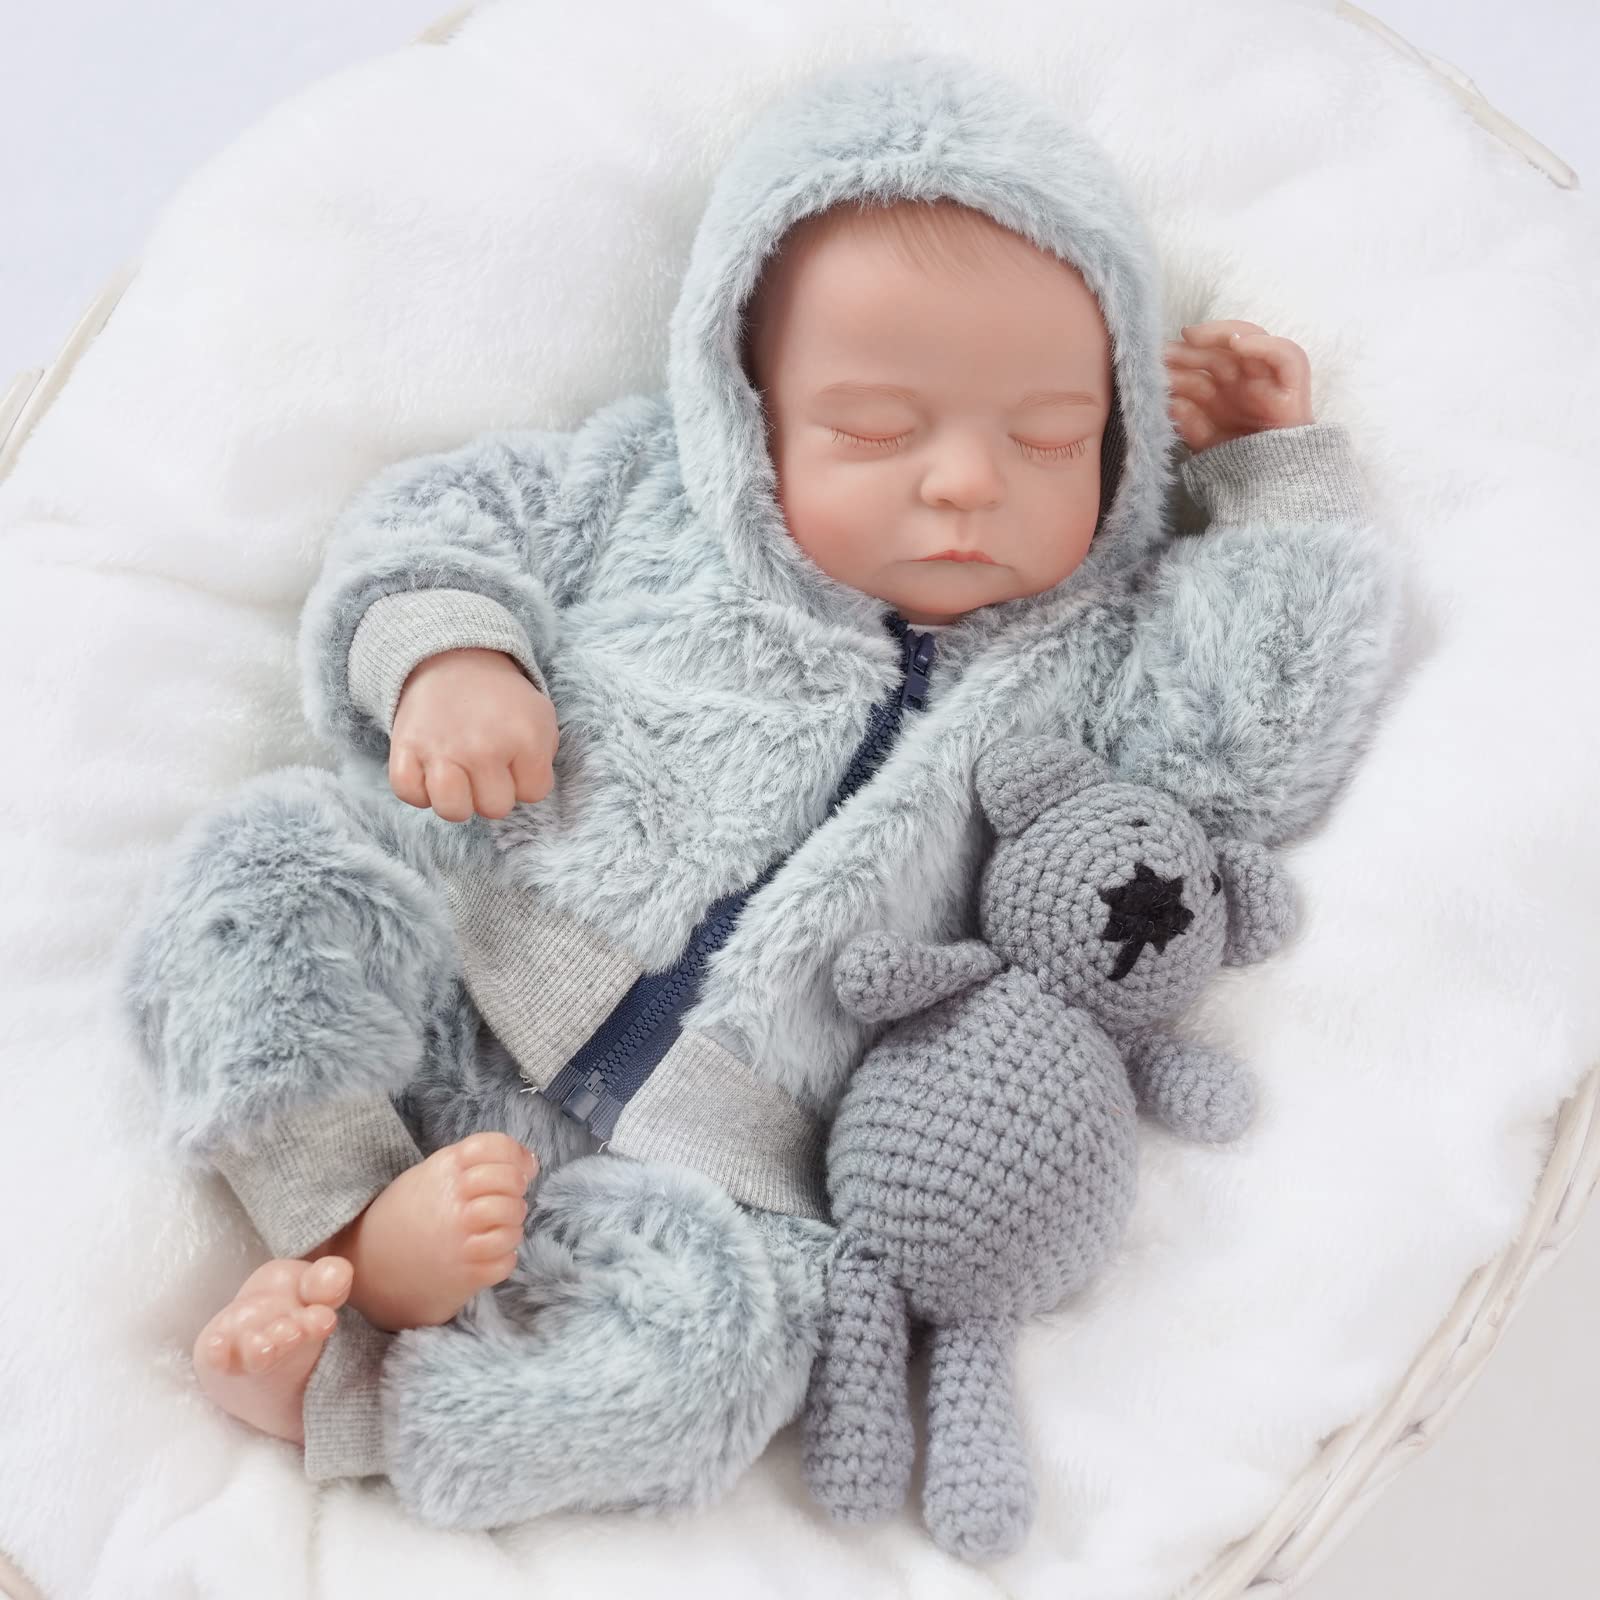 BABESIDE Lifelike Reborn Baby Dolls Boys - 17-Inch Real Baby Feeling Realistic-Newborn Baby Dolls Full Body Vinyl Anatomically Correct Real Life Baby Dolls with Accessories Gift Set for Kids Age 3+